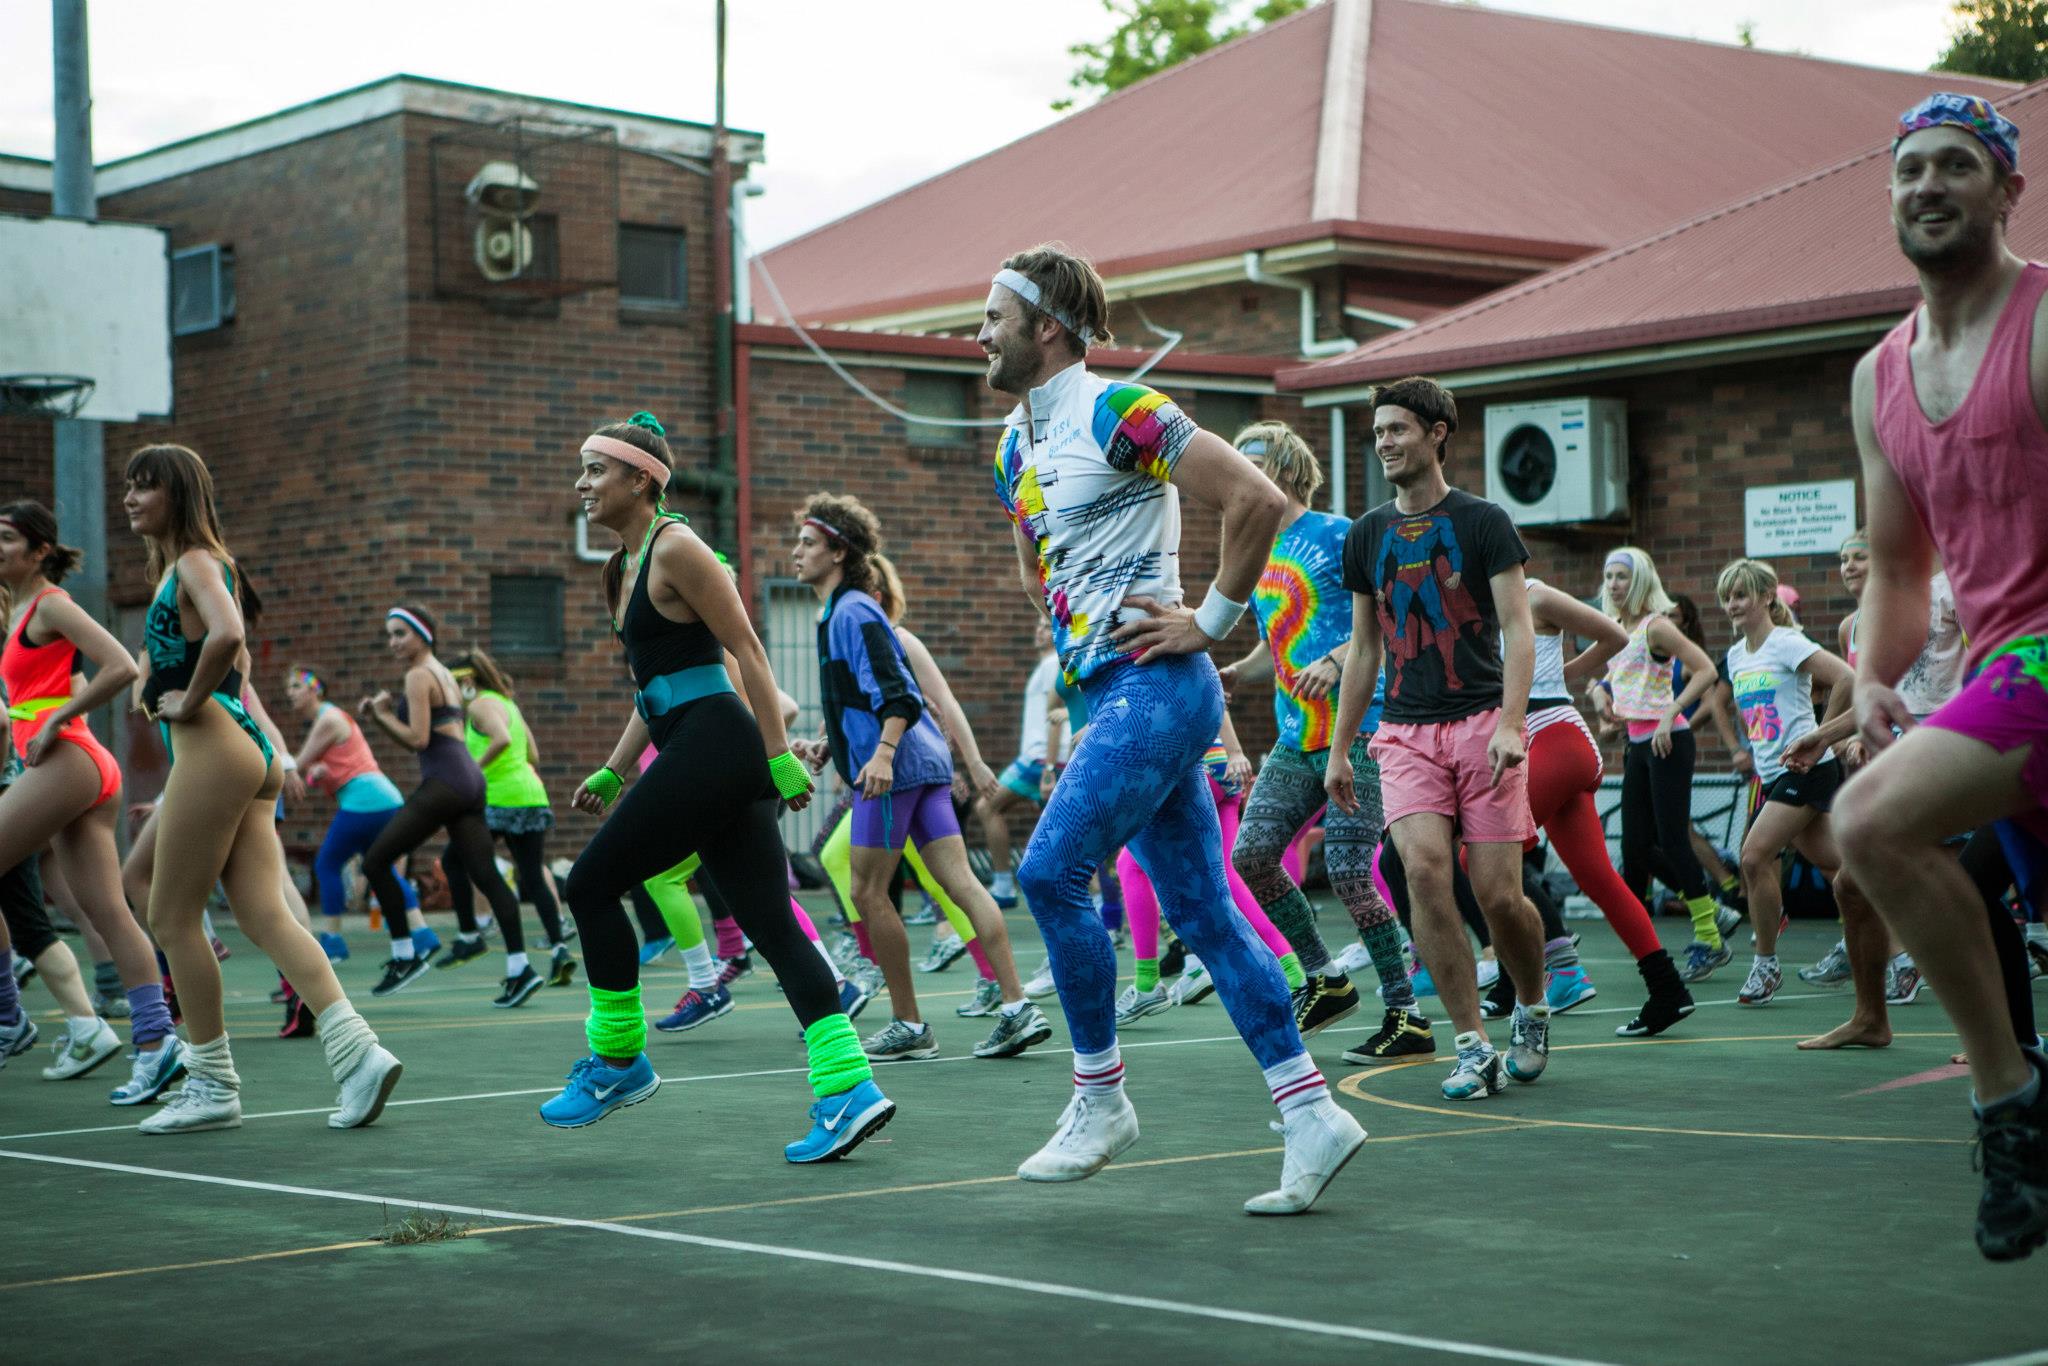 Dance Your Way To Fitness With Retrosweat's 80s Inspired Workout - Redfern  News